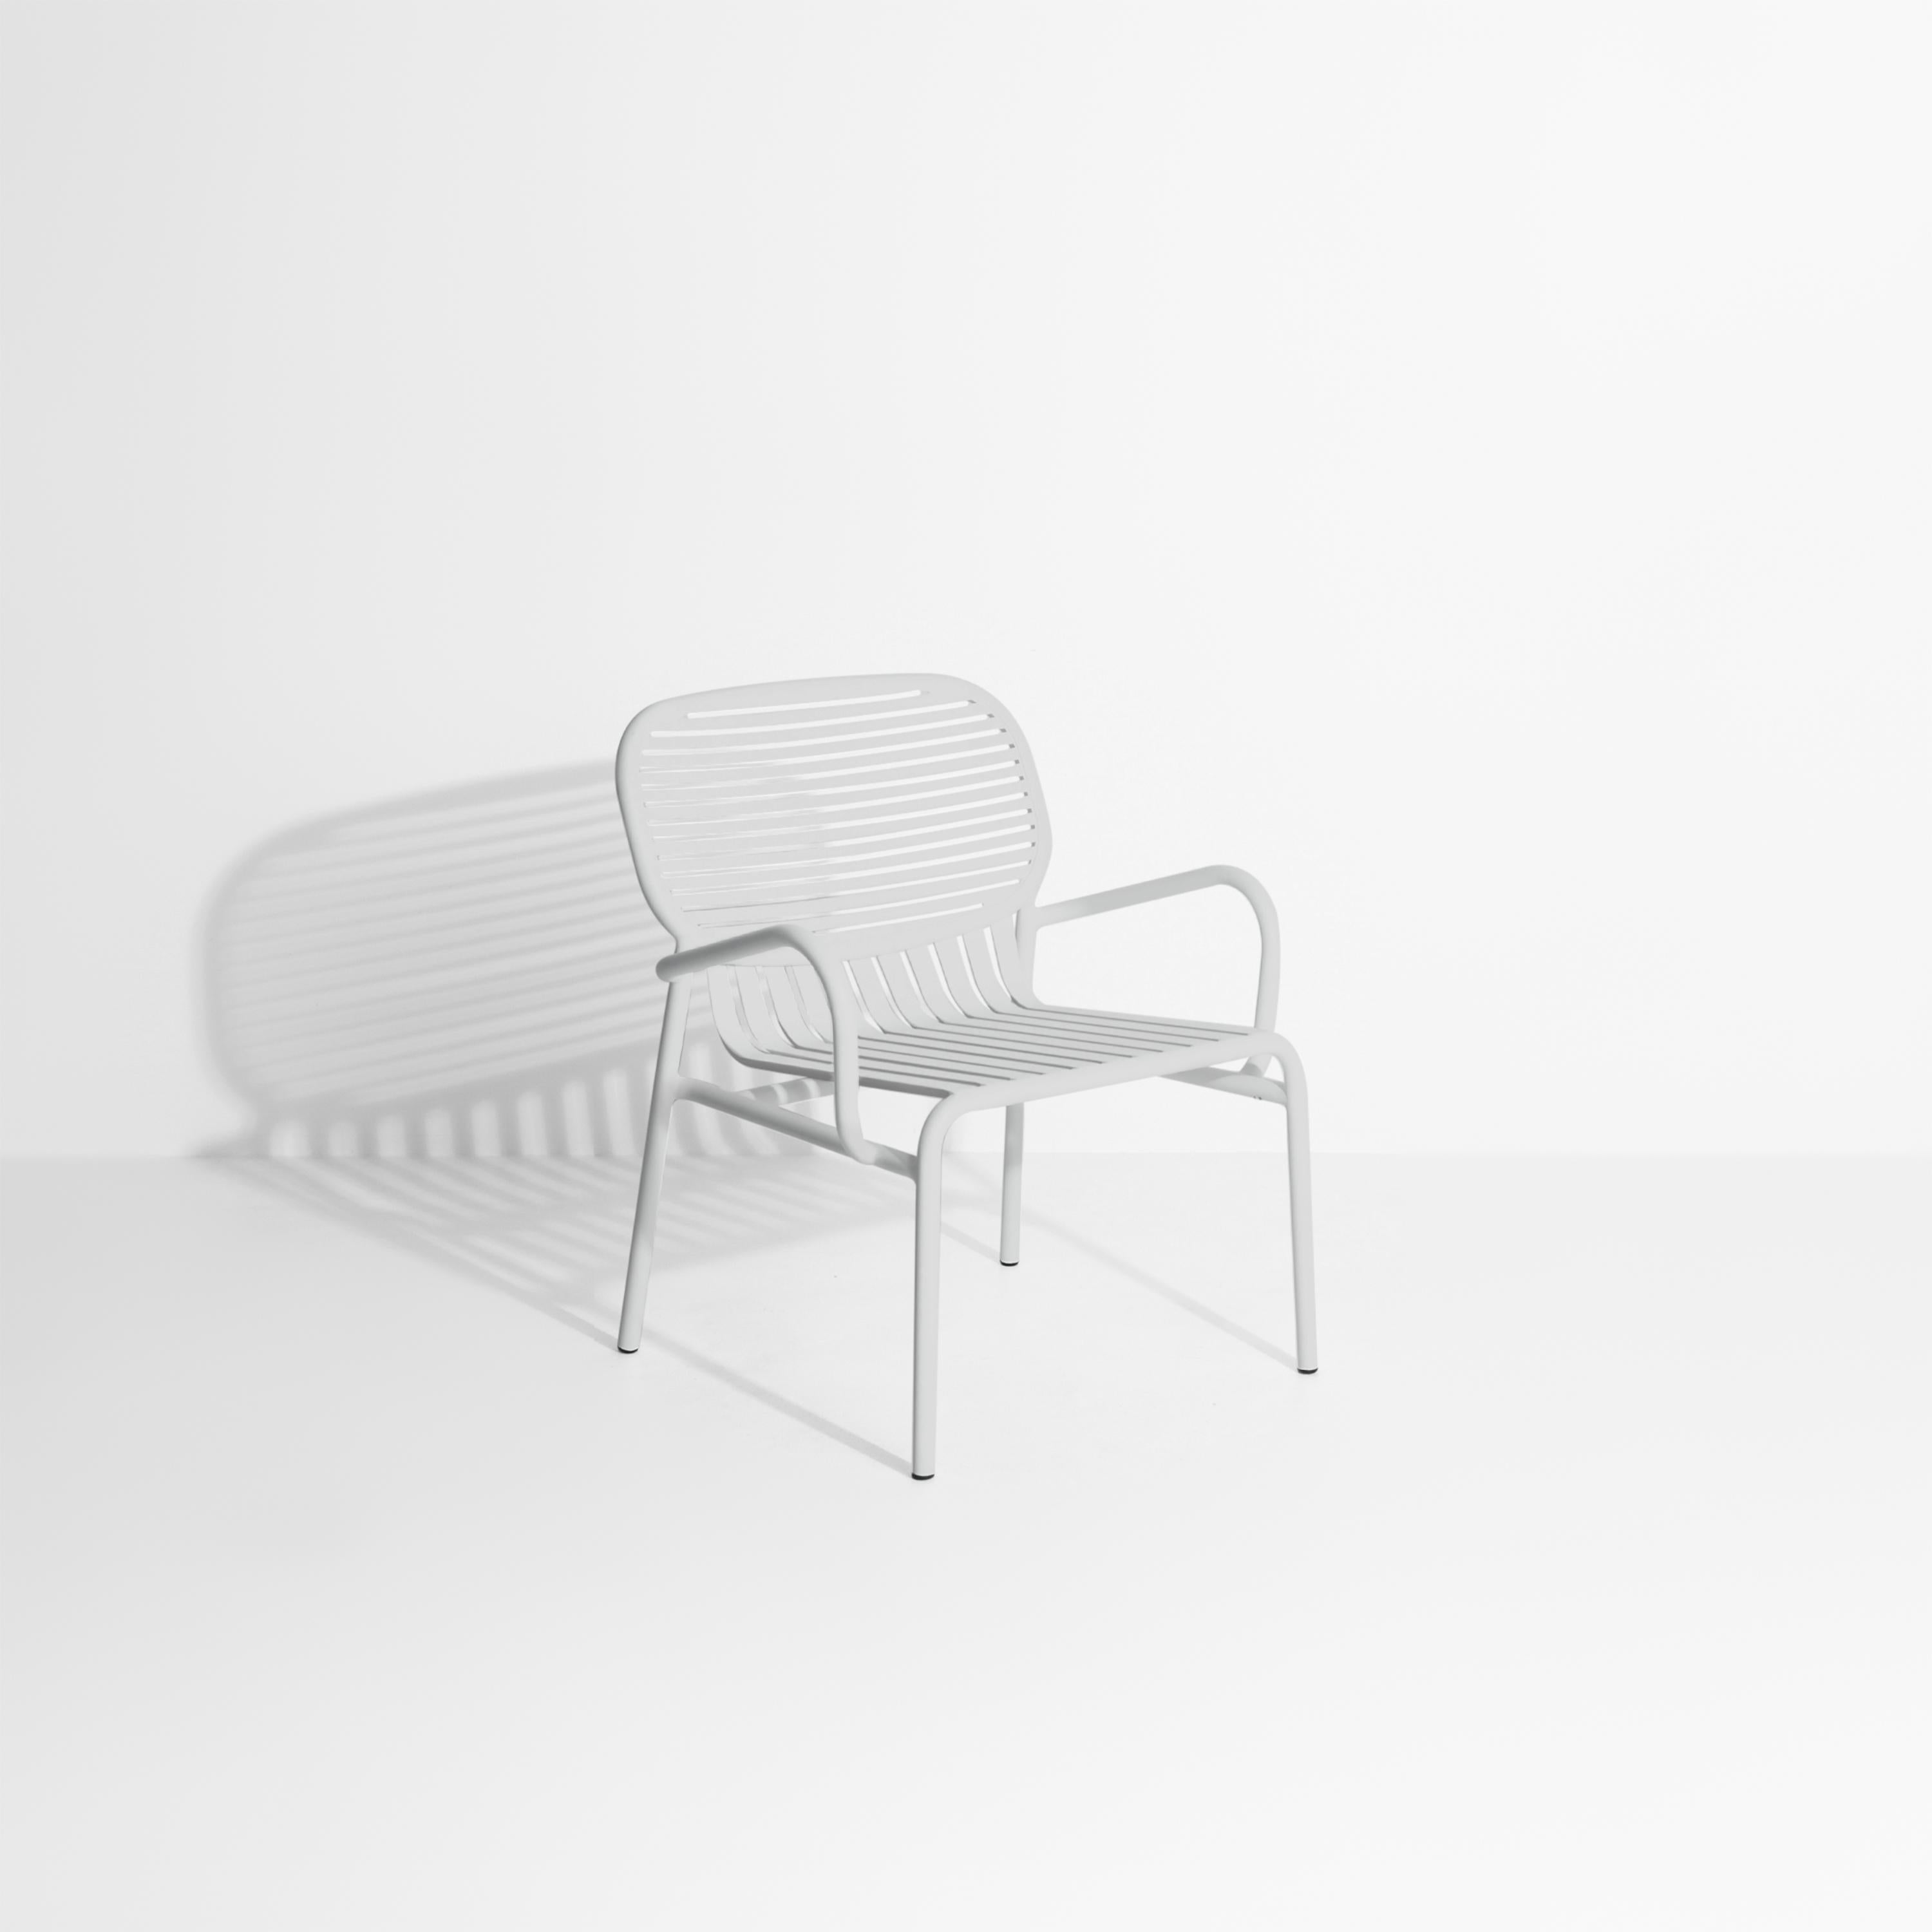 Petite Friture Week-End Armchair in Pearl Grey Aluminium by Studio BrichetZiegler, 2017

The week-end collection is a full range of outdoor furniture, in aluminium grained epoxy paint, matt finish, that includes 18 functions and 8 colours for the